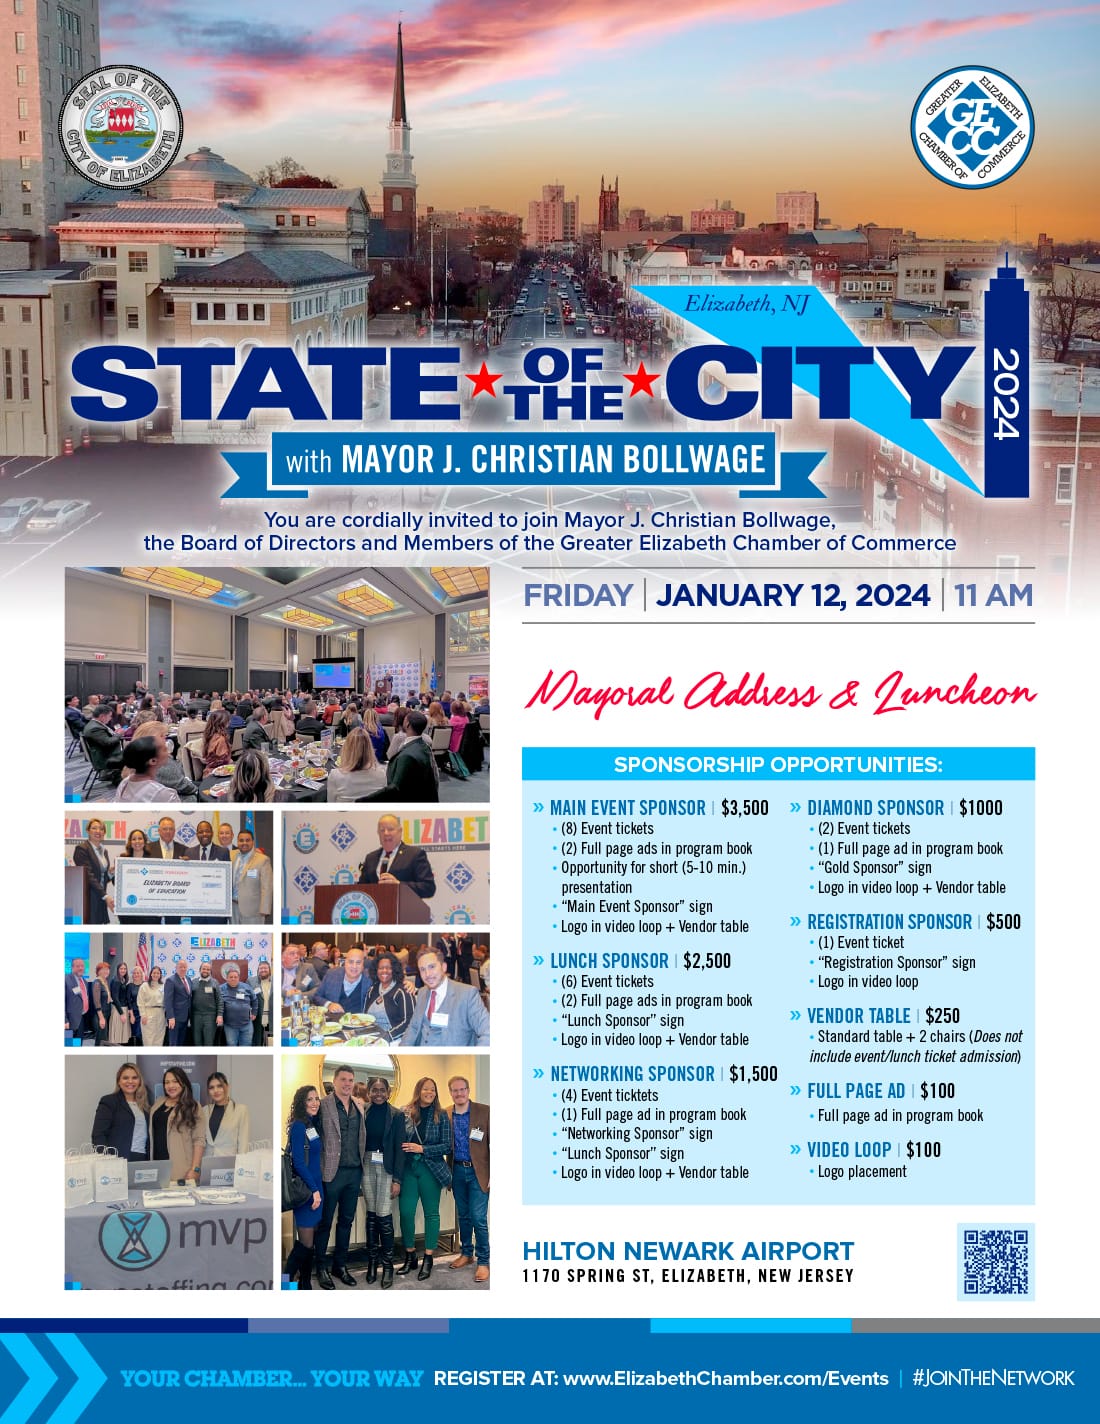 State of the City - 2024 - FLYER - 8.5x11 - FOLLOW-ON